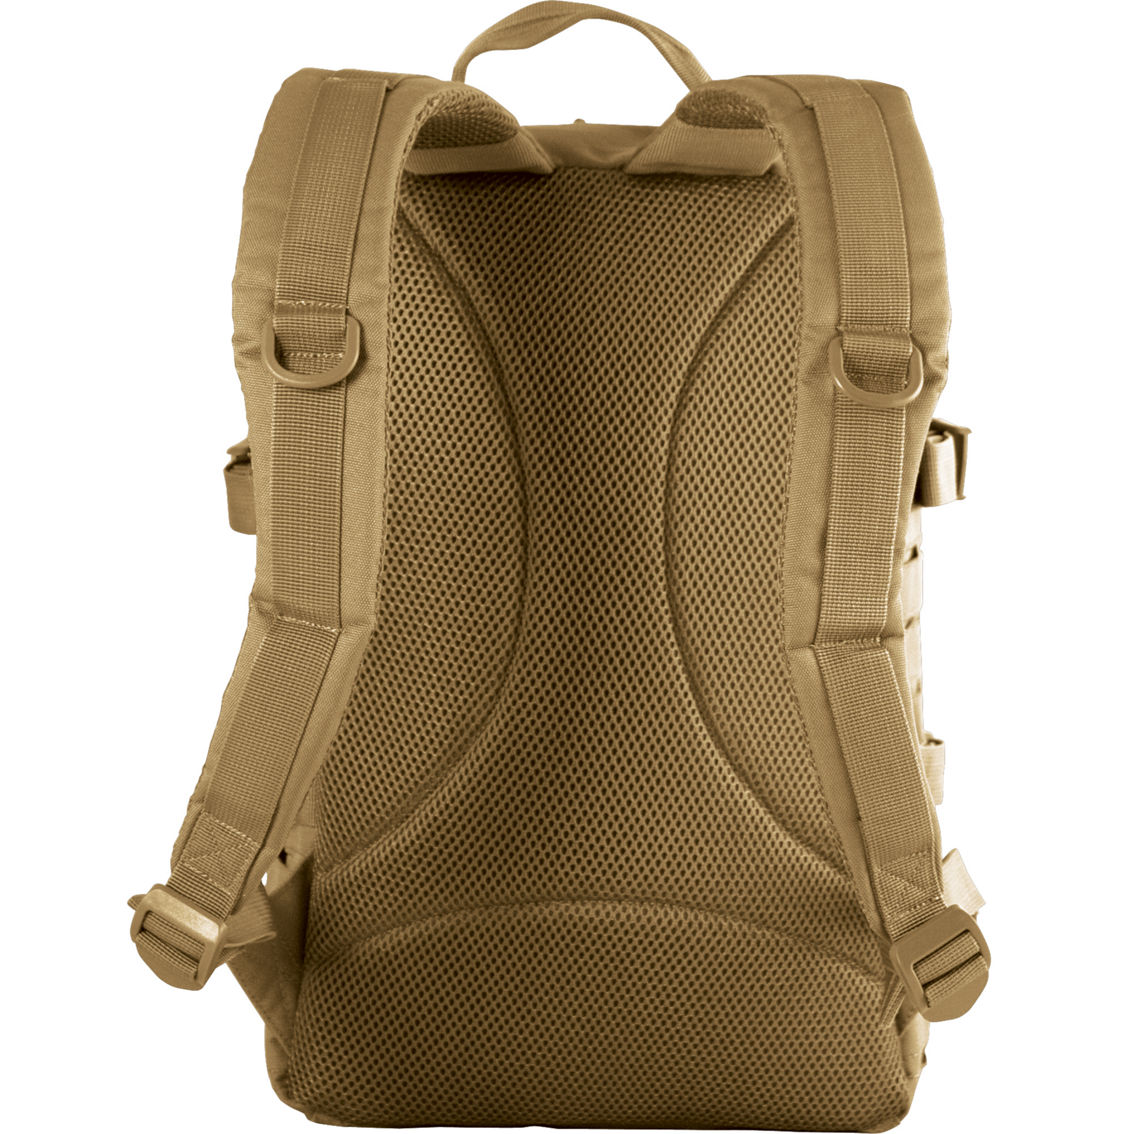 Red Rock Outdoor Gear Transporter Day Pack - Image 2 of 9